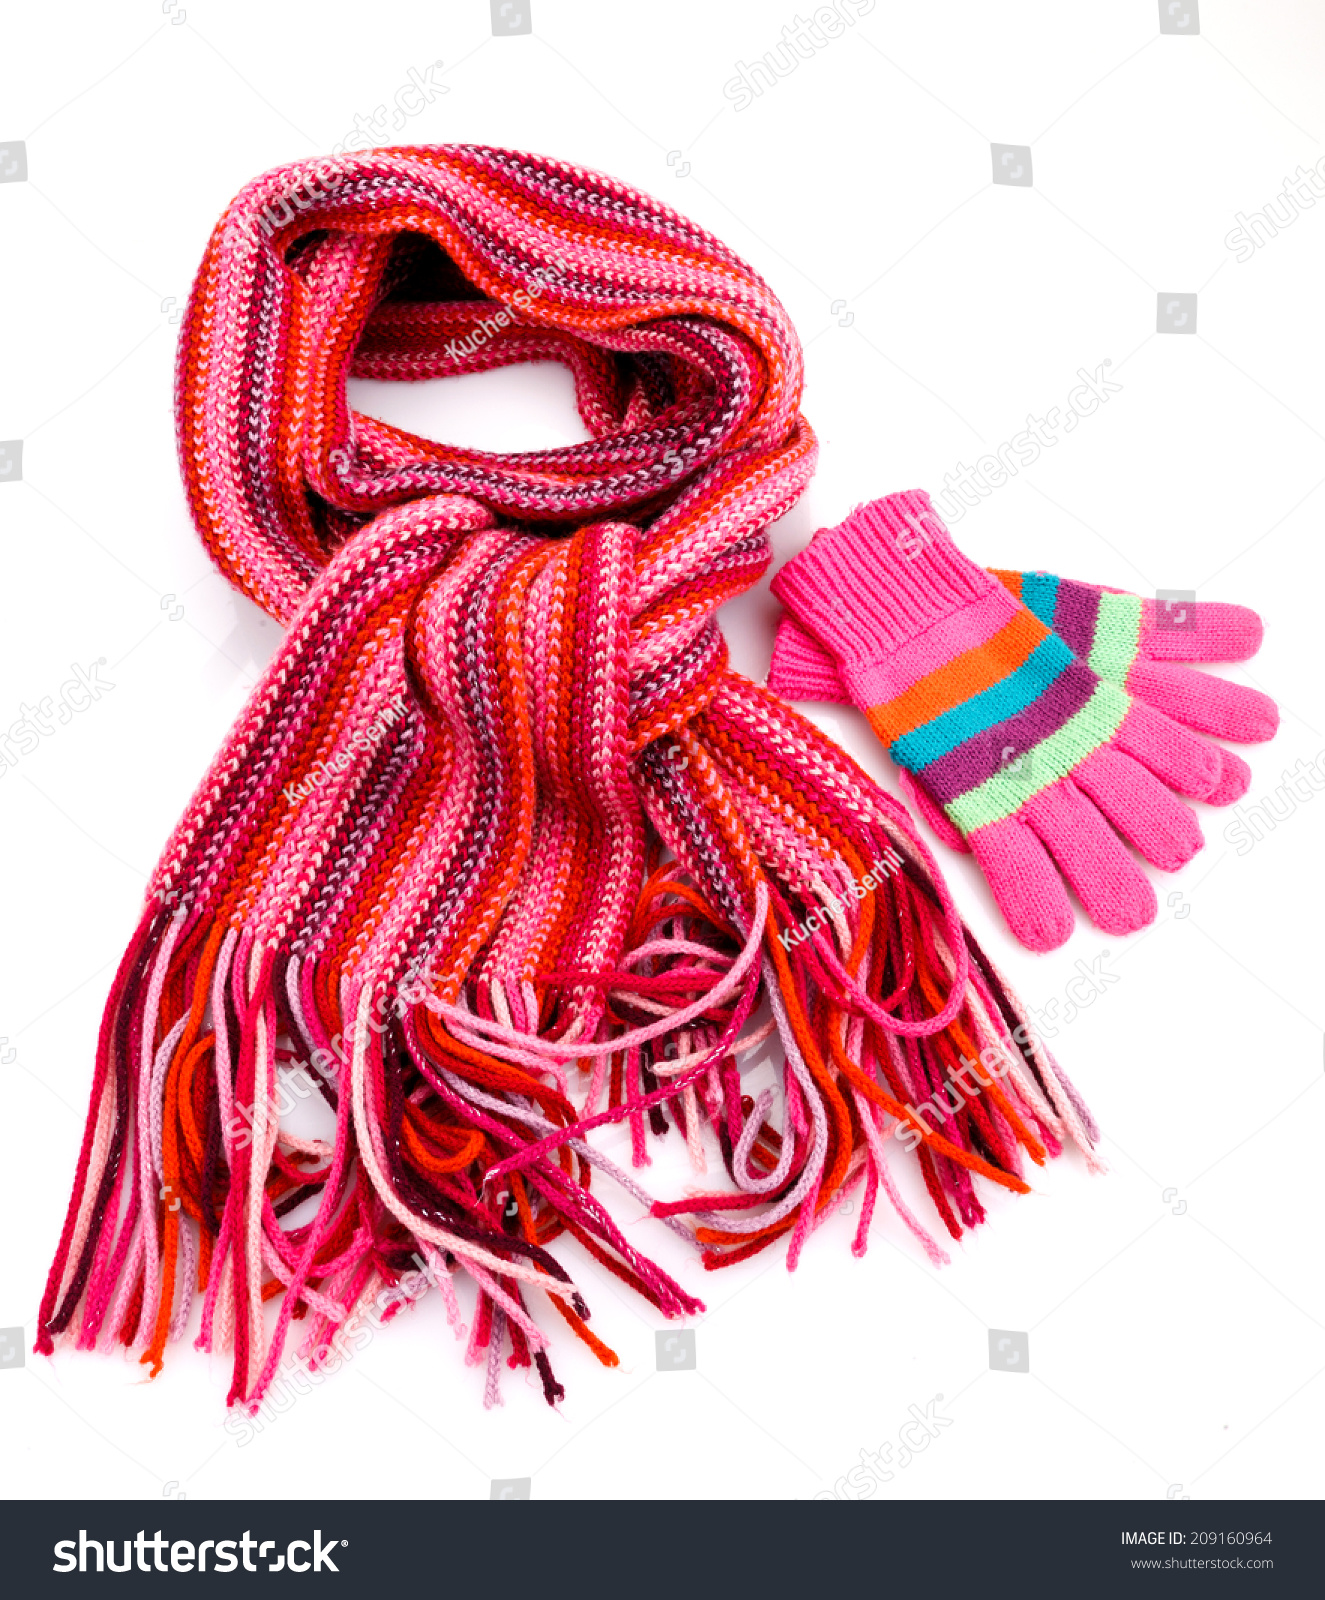 Striped scarf and gloves  isolated  on white #209160964